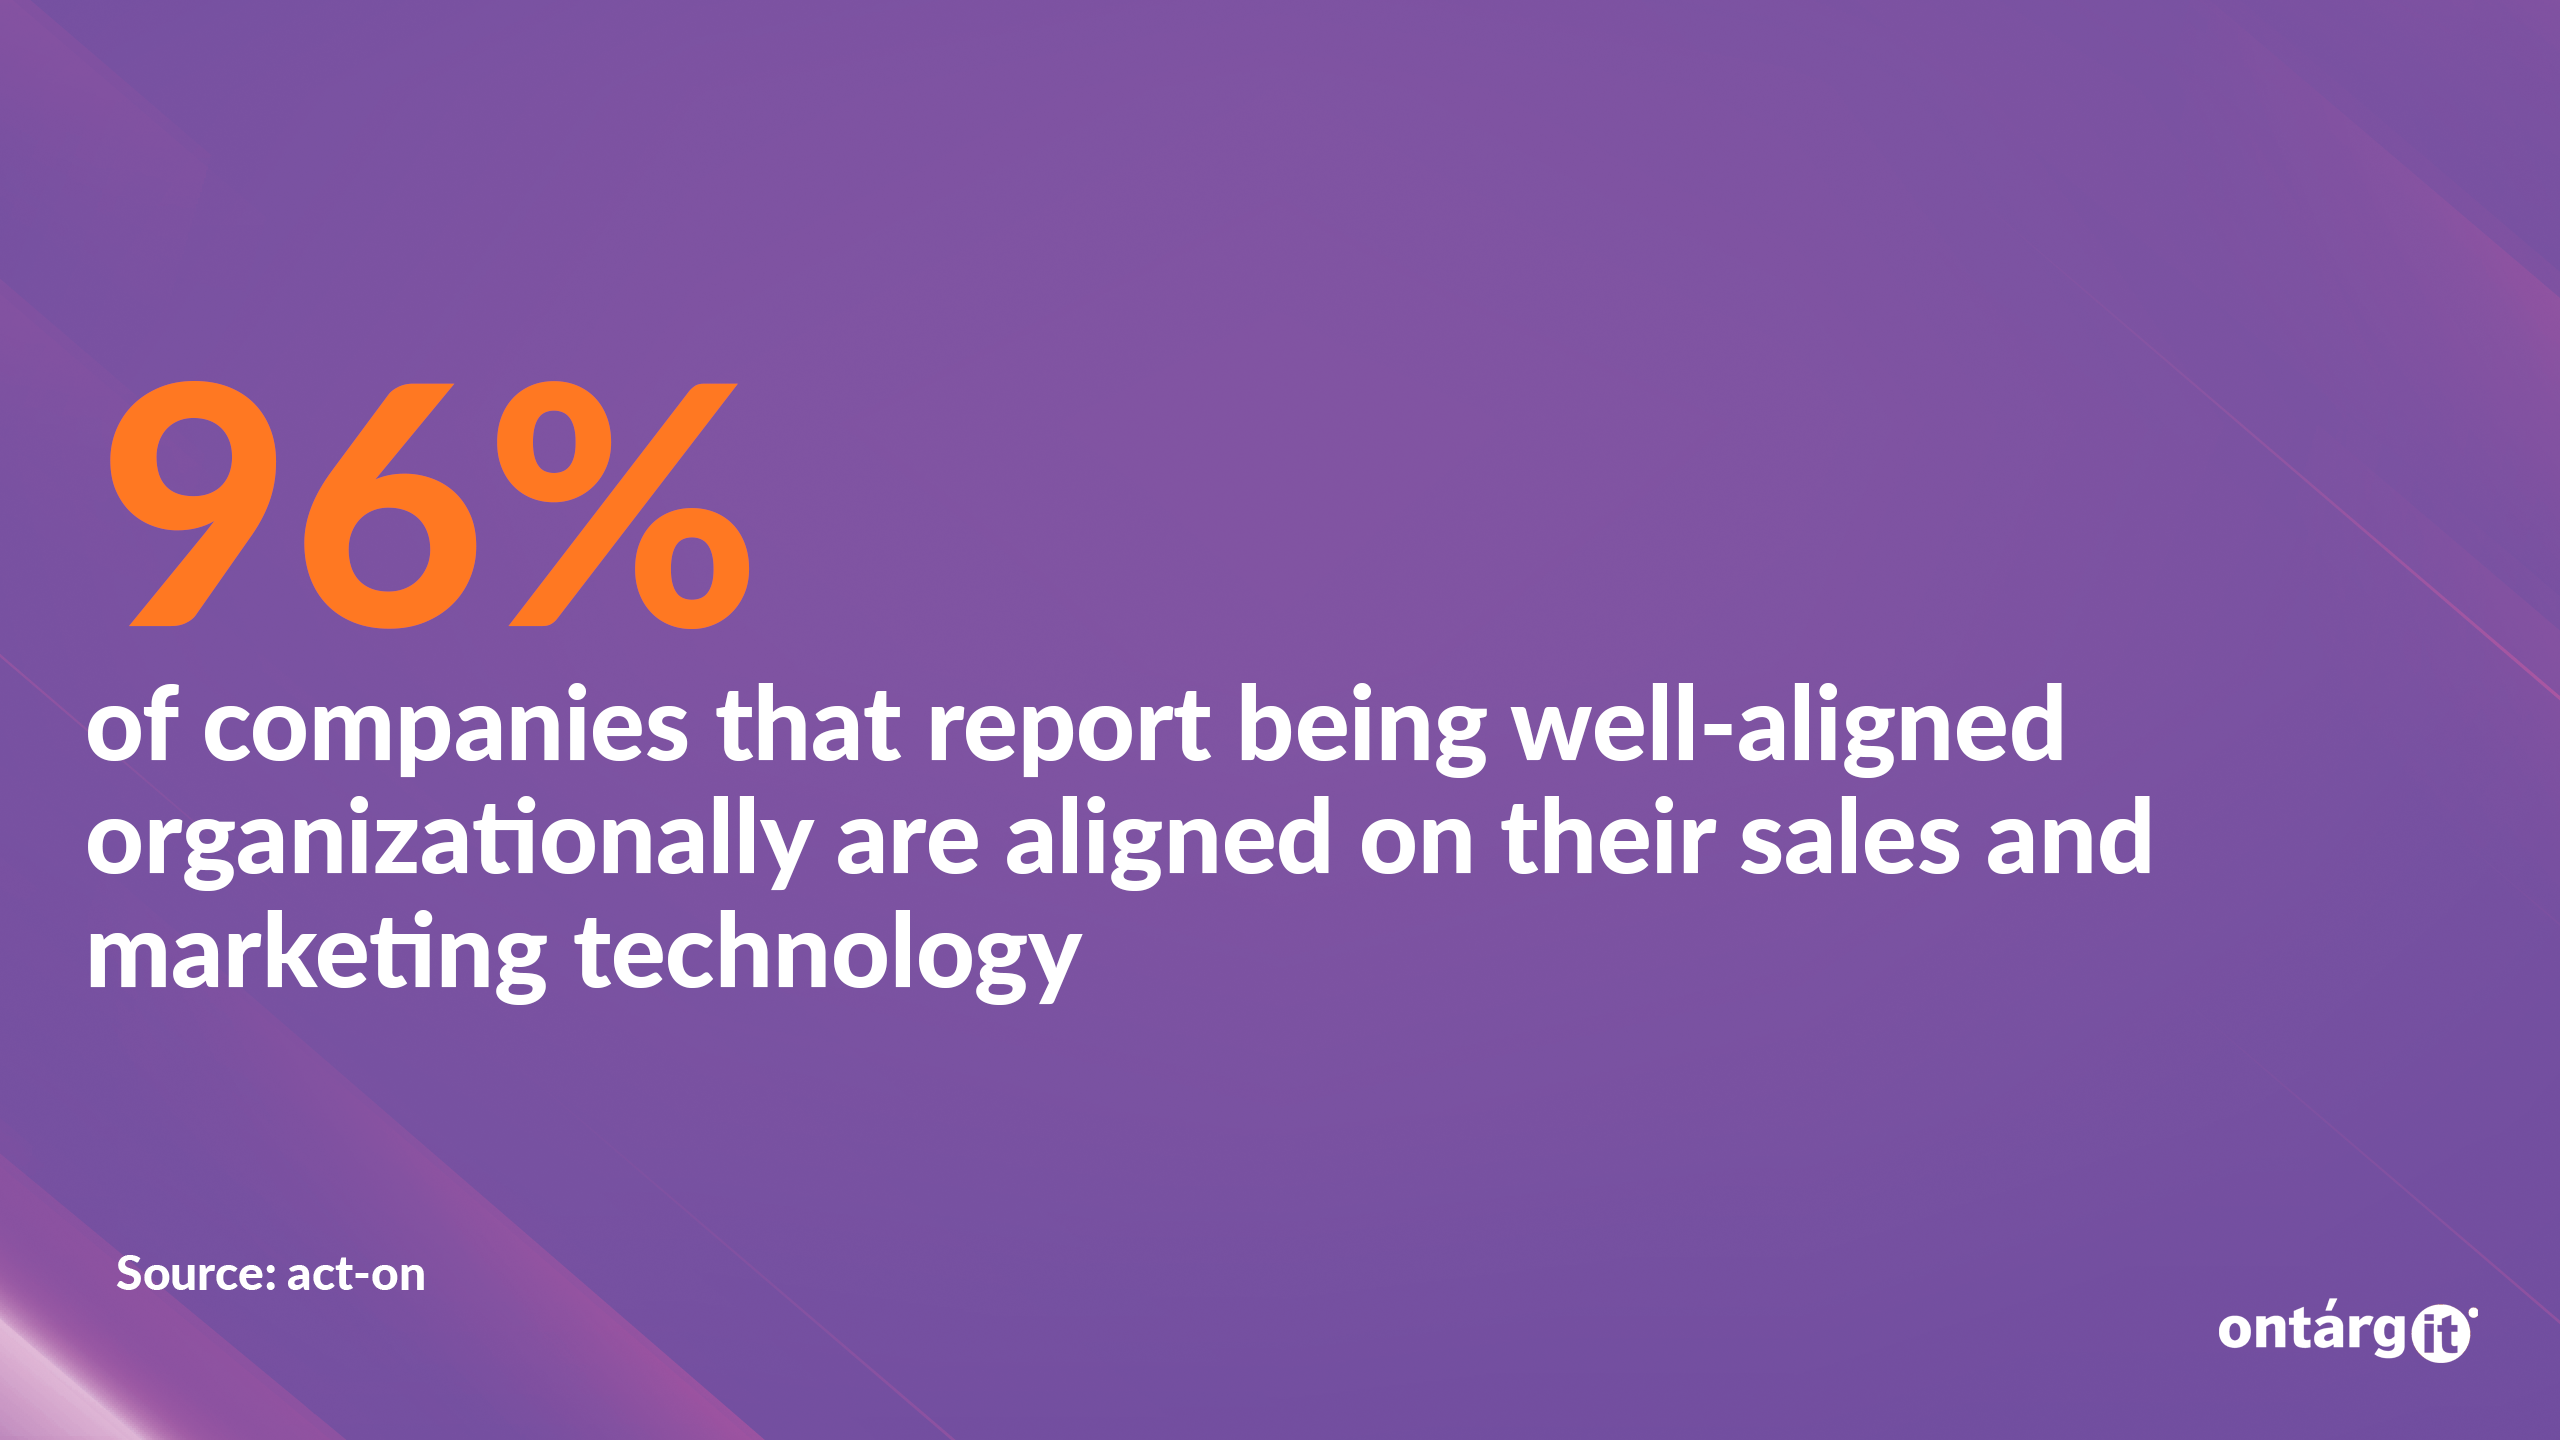 96% of companies that report being well-aligned organizationally are aligned on their sales and marketing technology